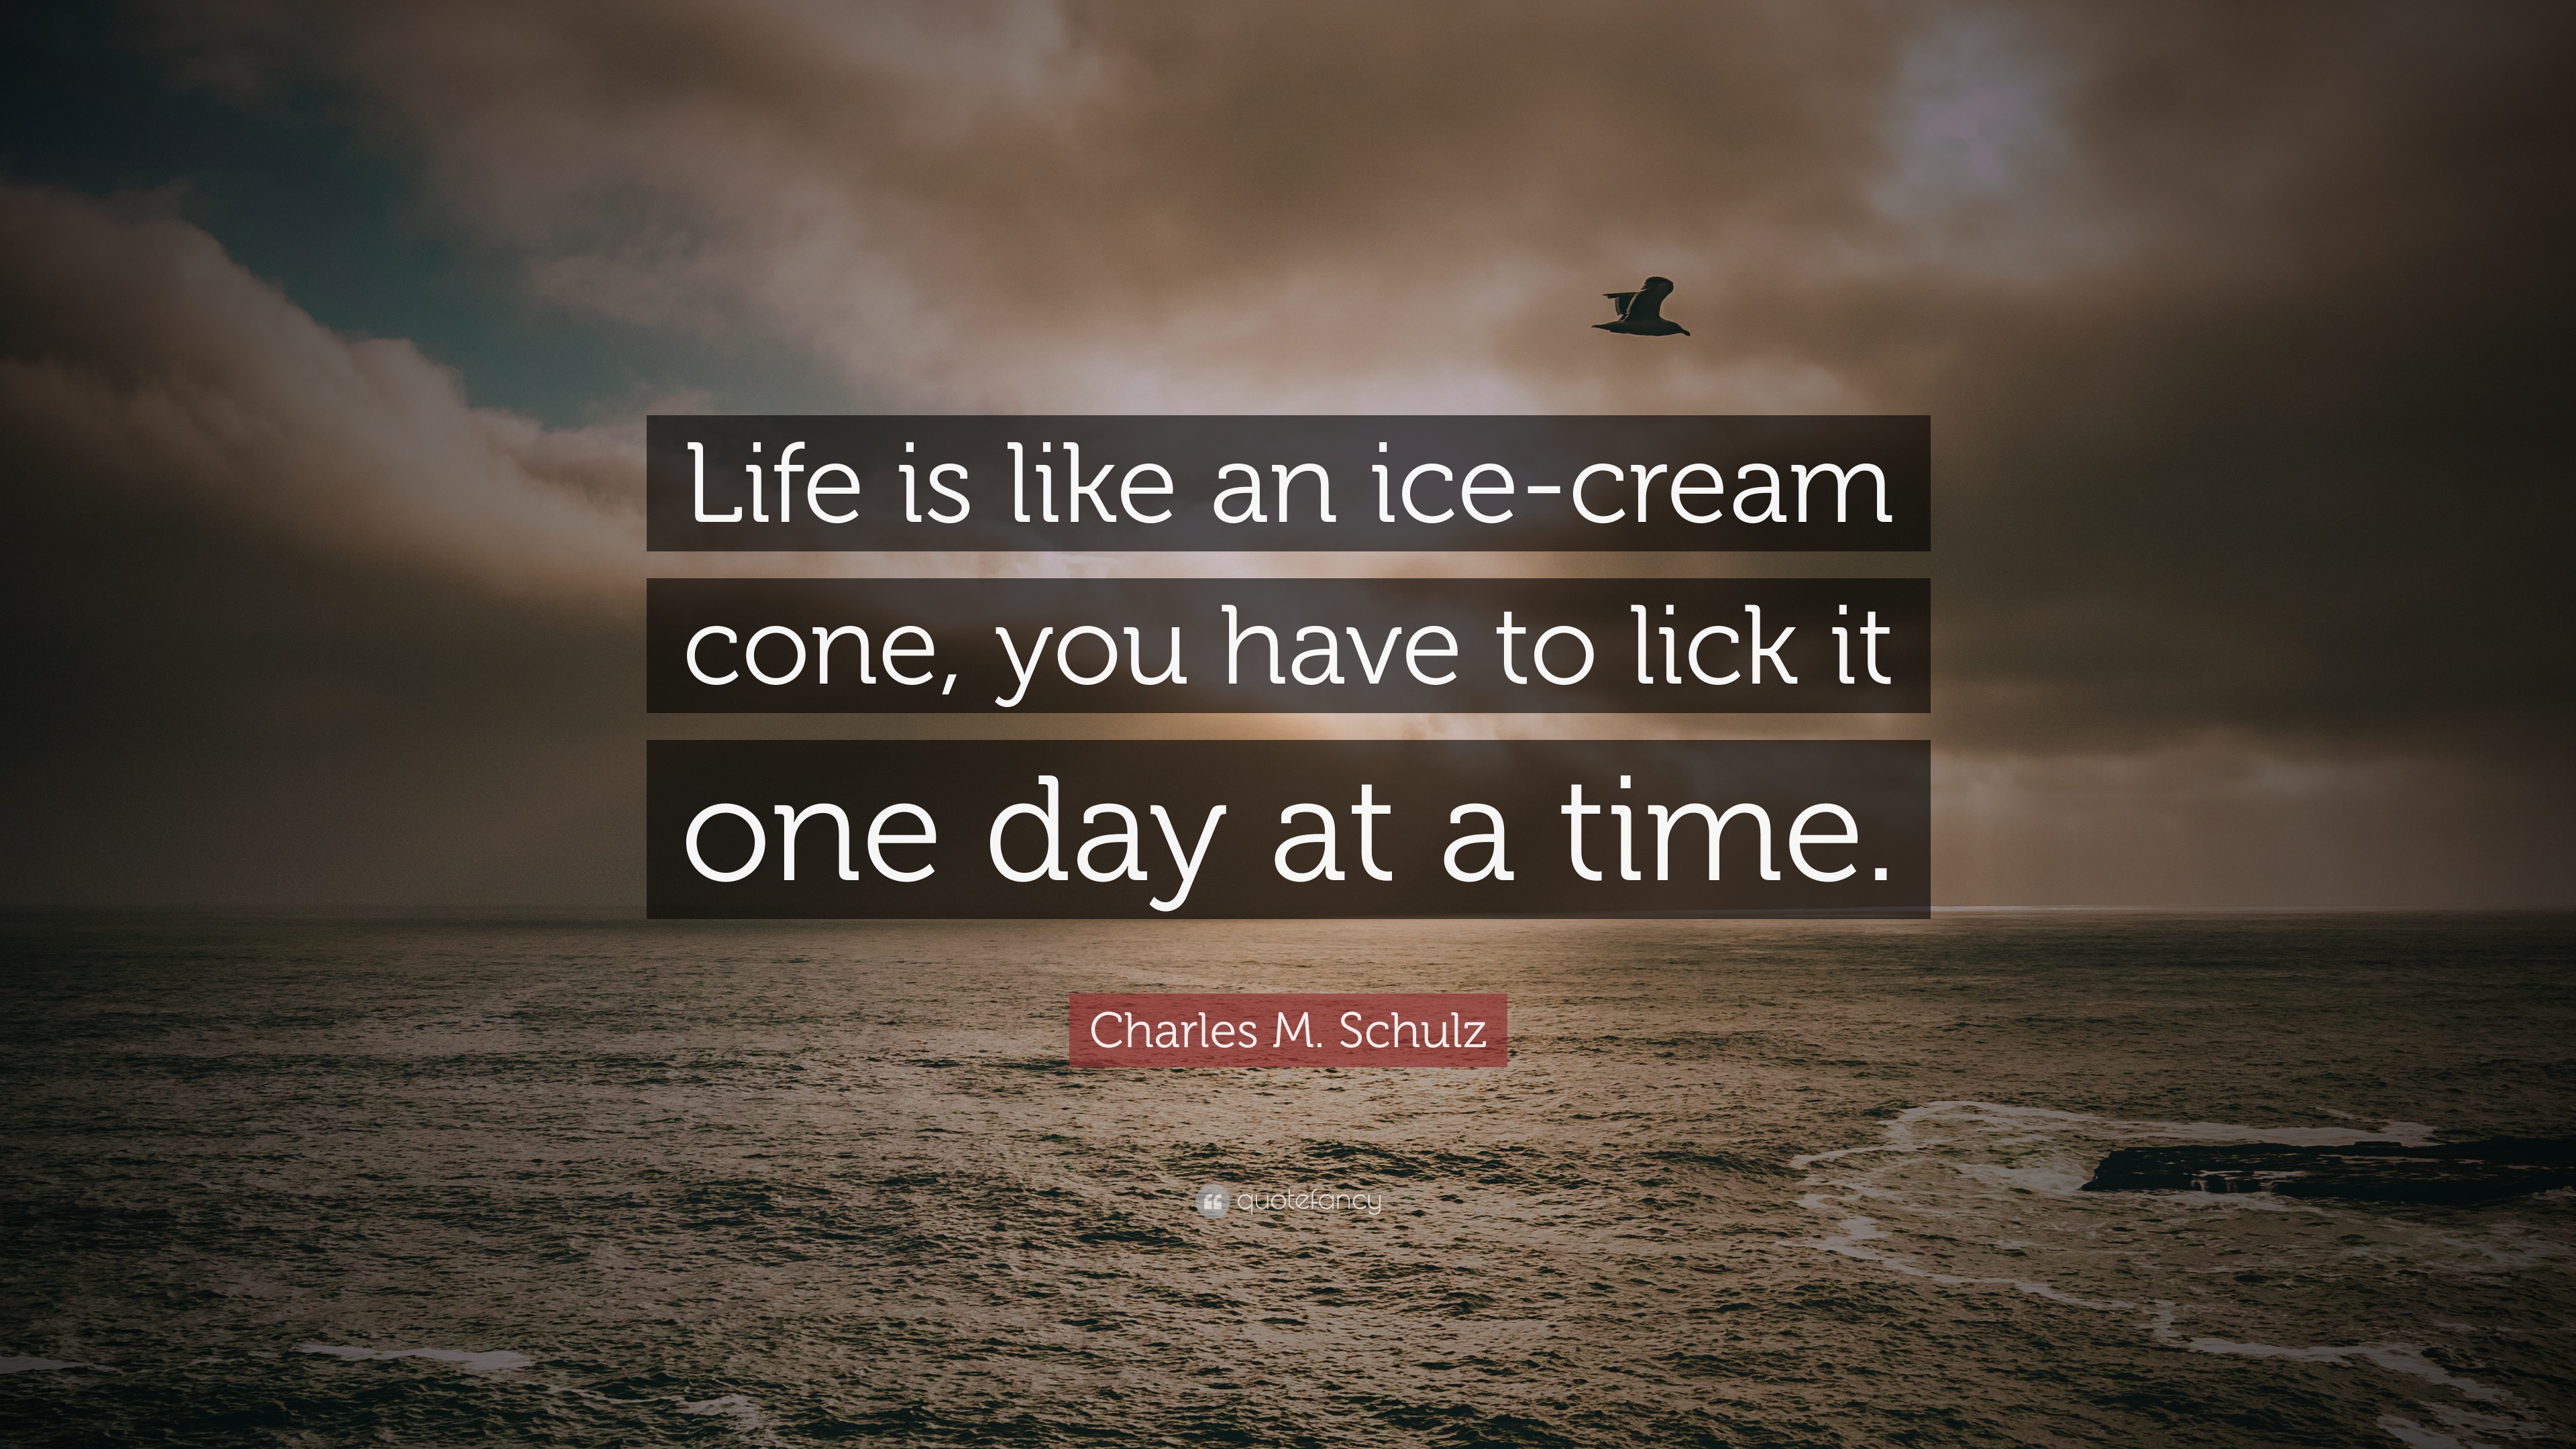 Charles M Schulz Quote “Life is like an ice cream cone